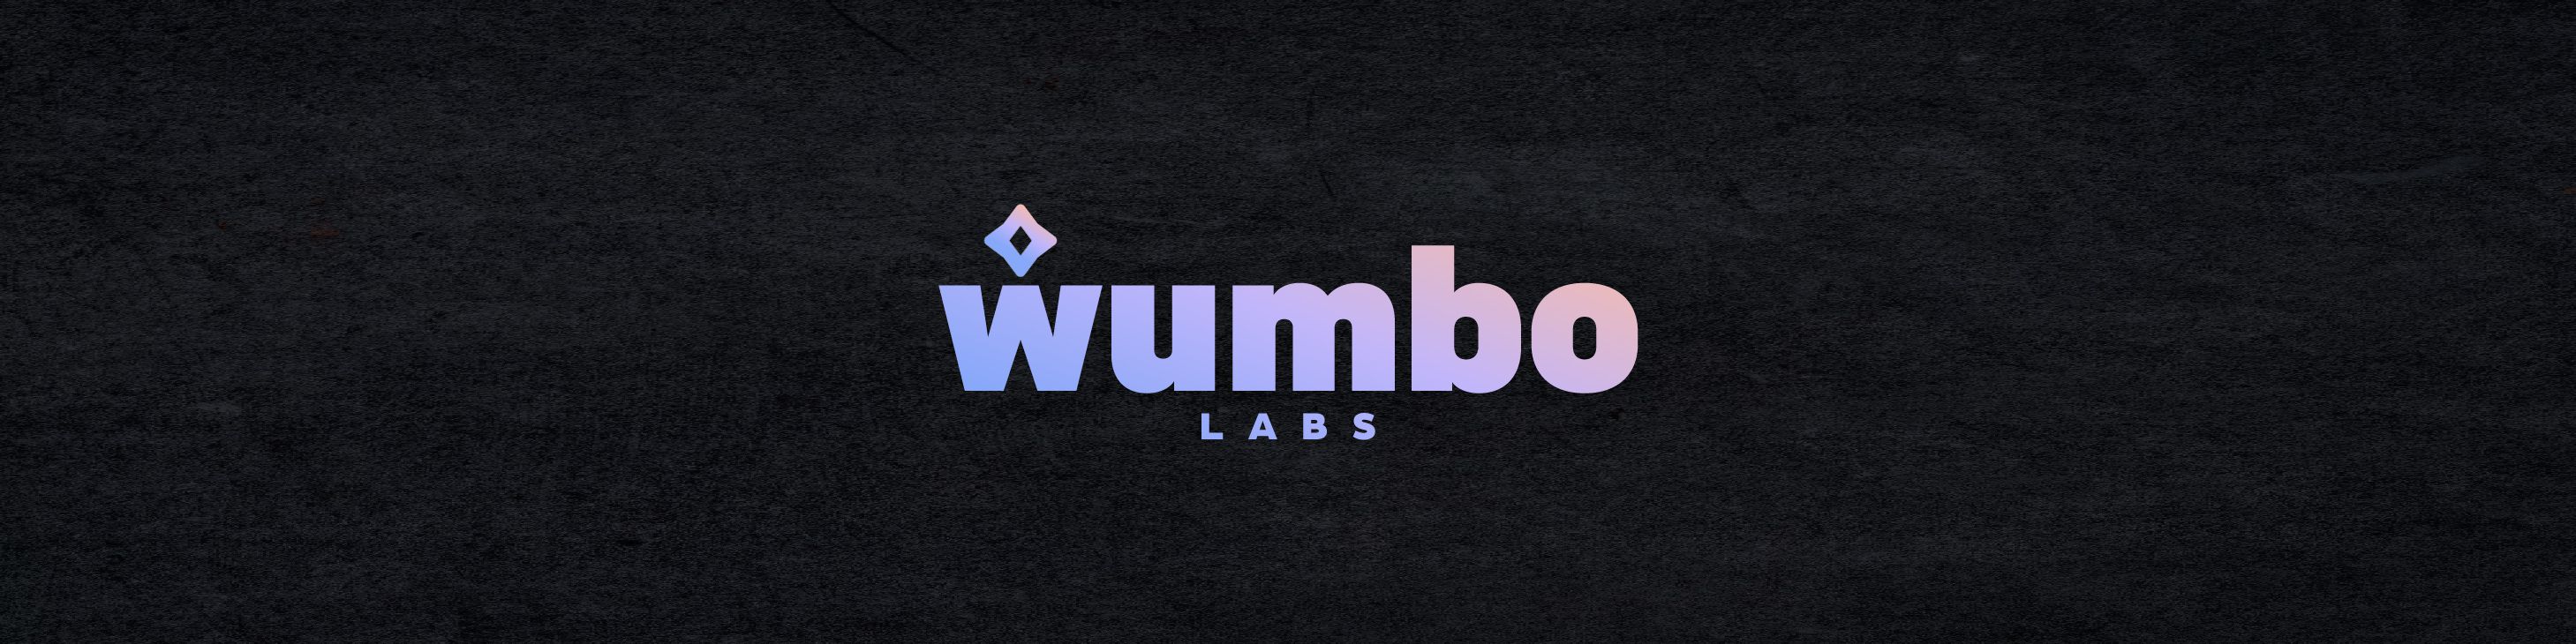 WumboLabs 배너